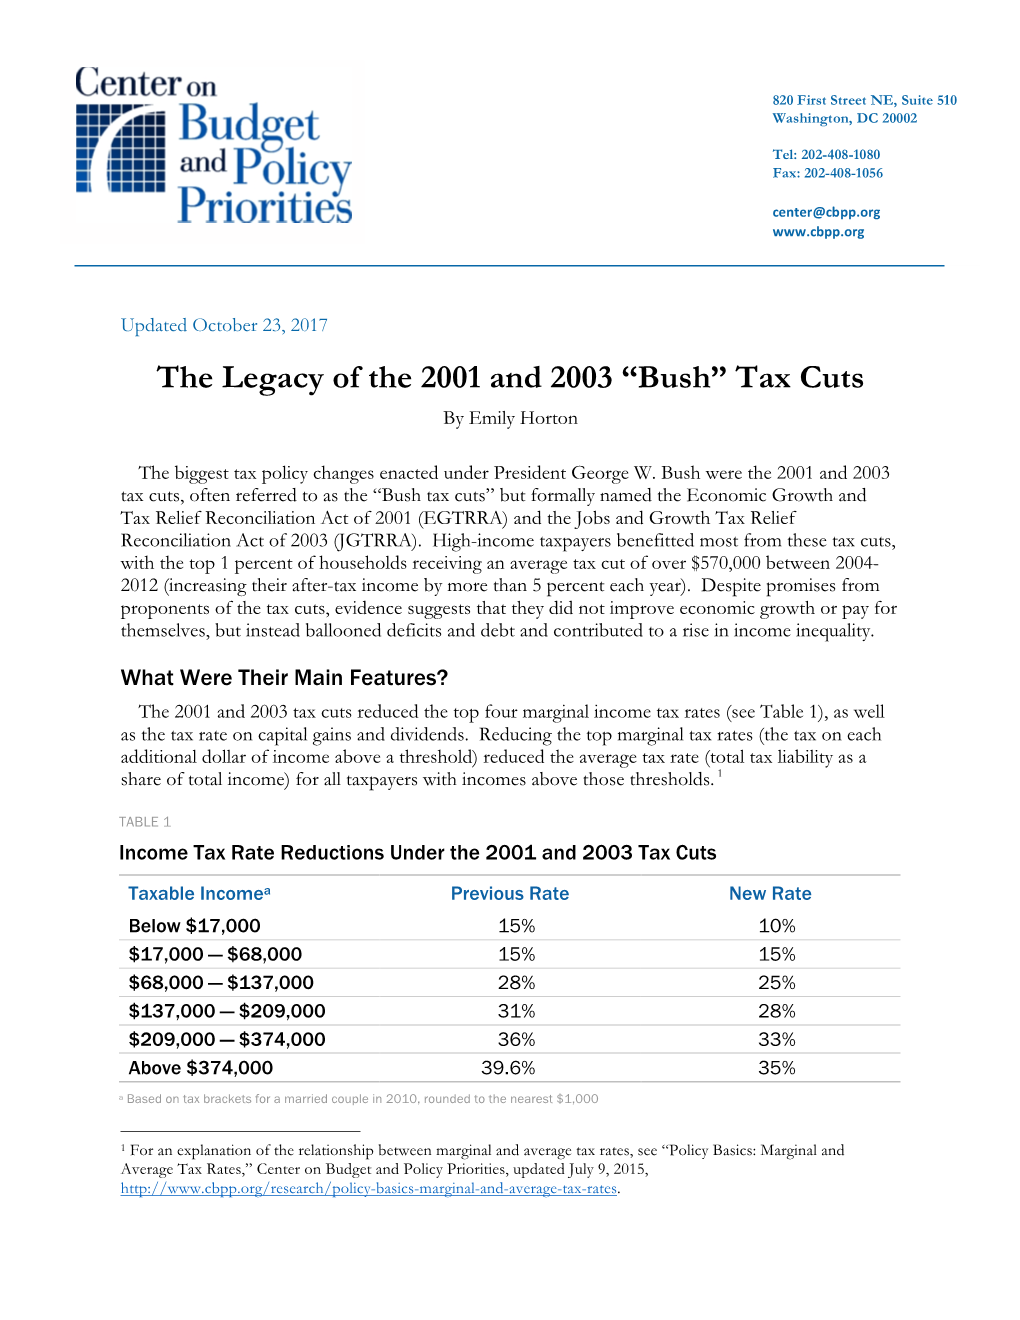 The Legacy of the 2001 and 2003 “Bush” Tax Cuts by Emily Horton